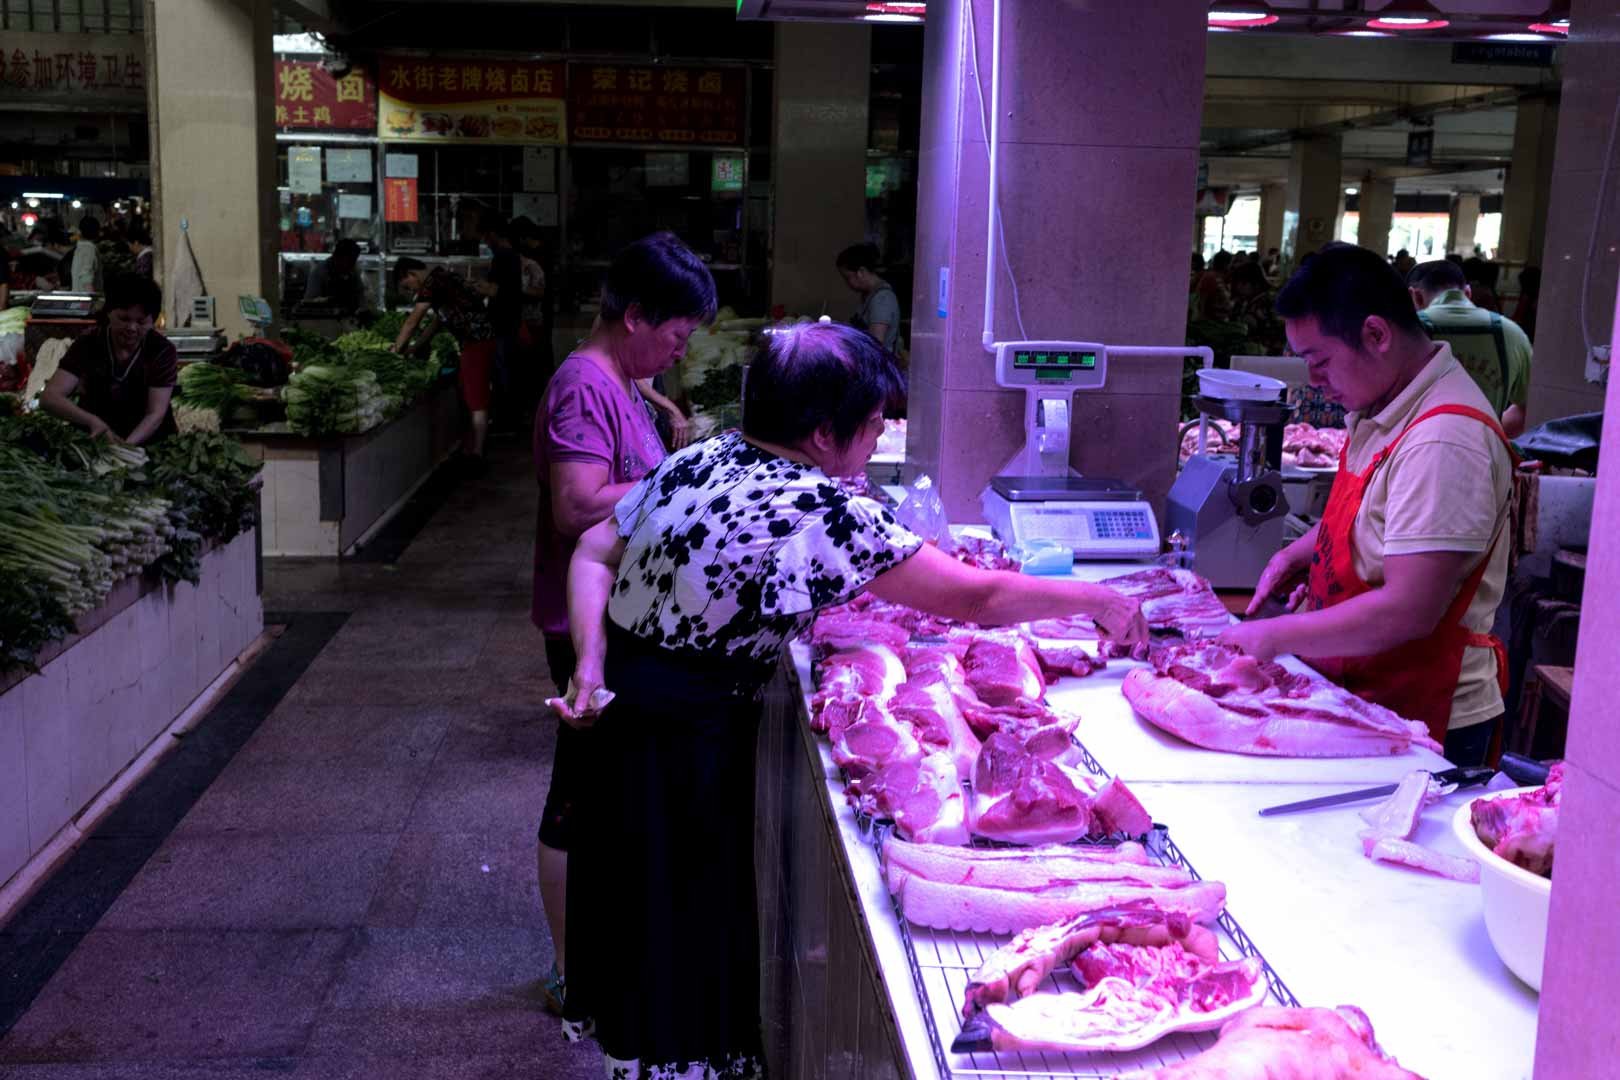 African Swine Fever in China